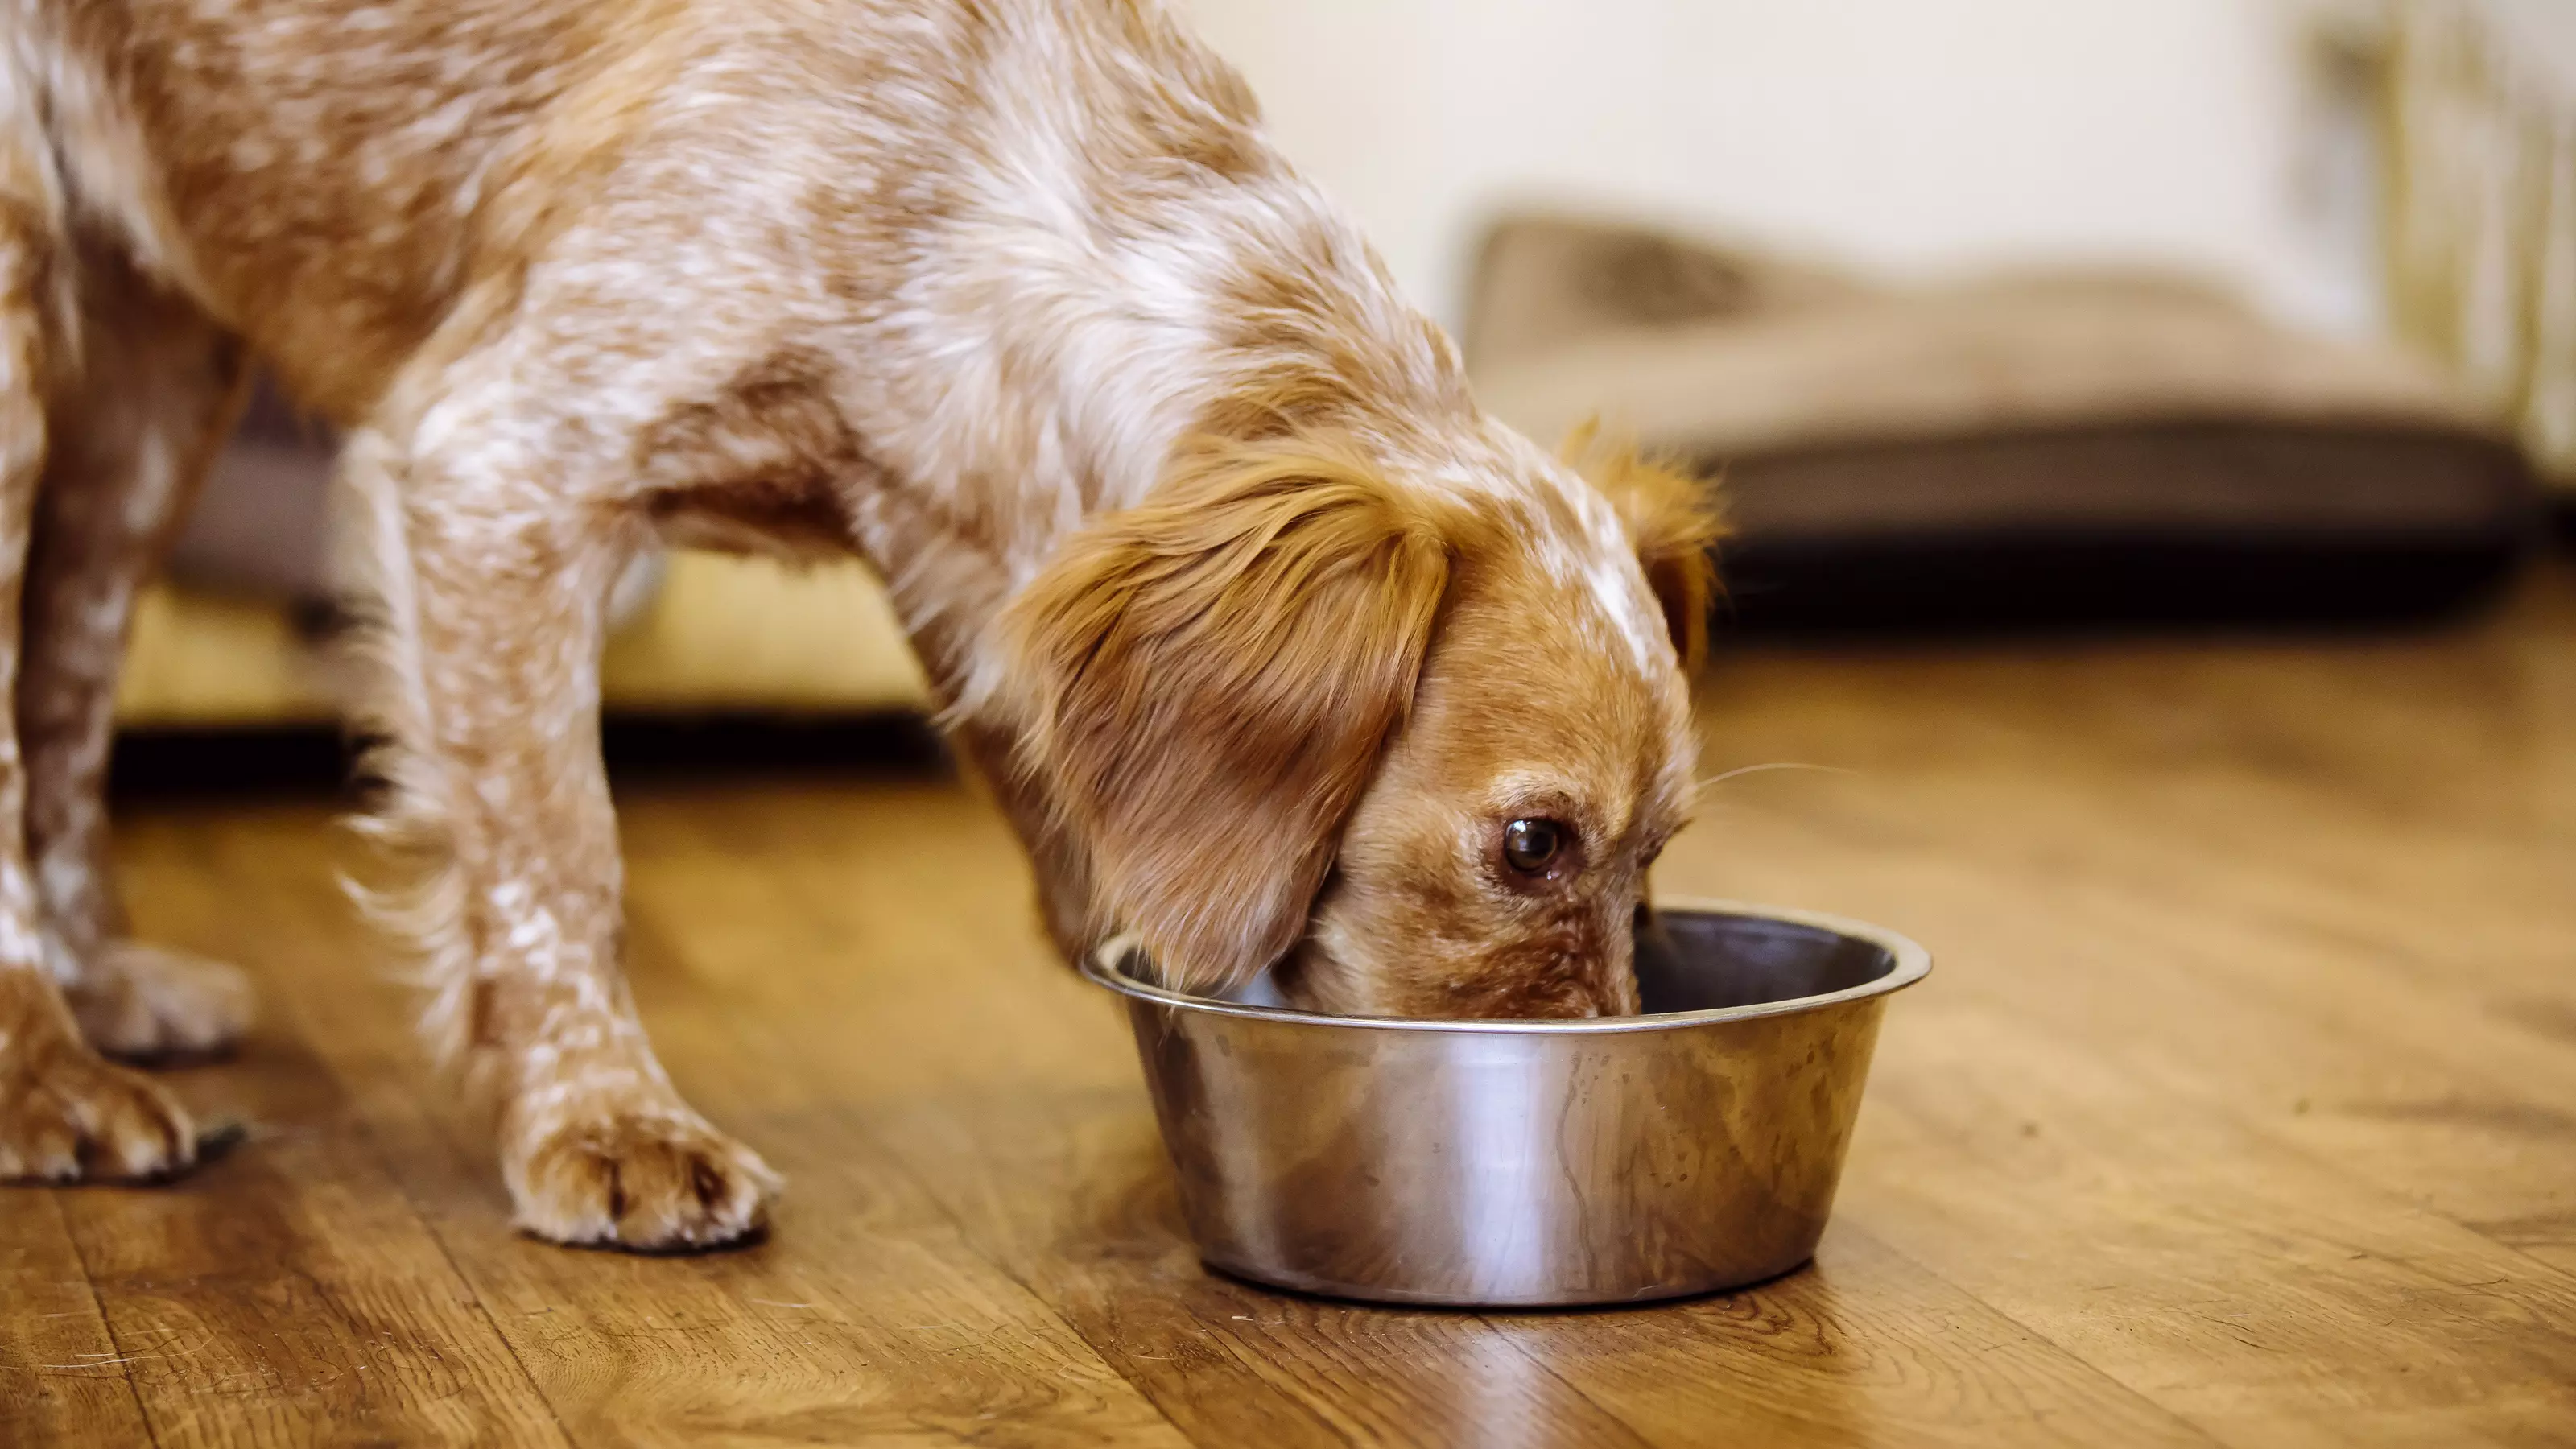 A dog eating food from a metal bowl.